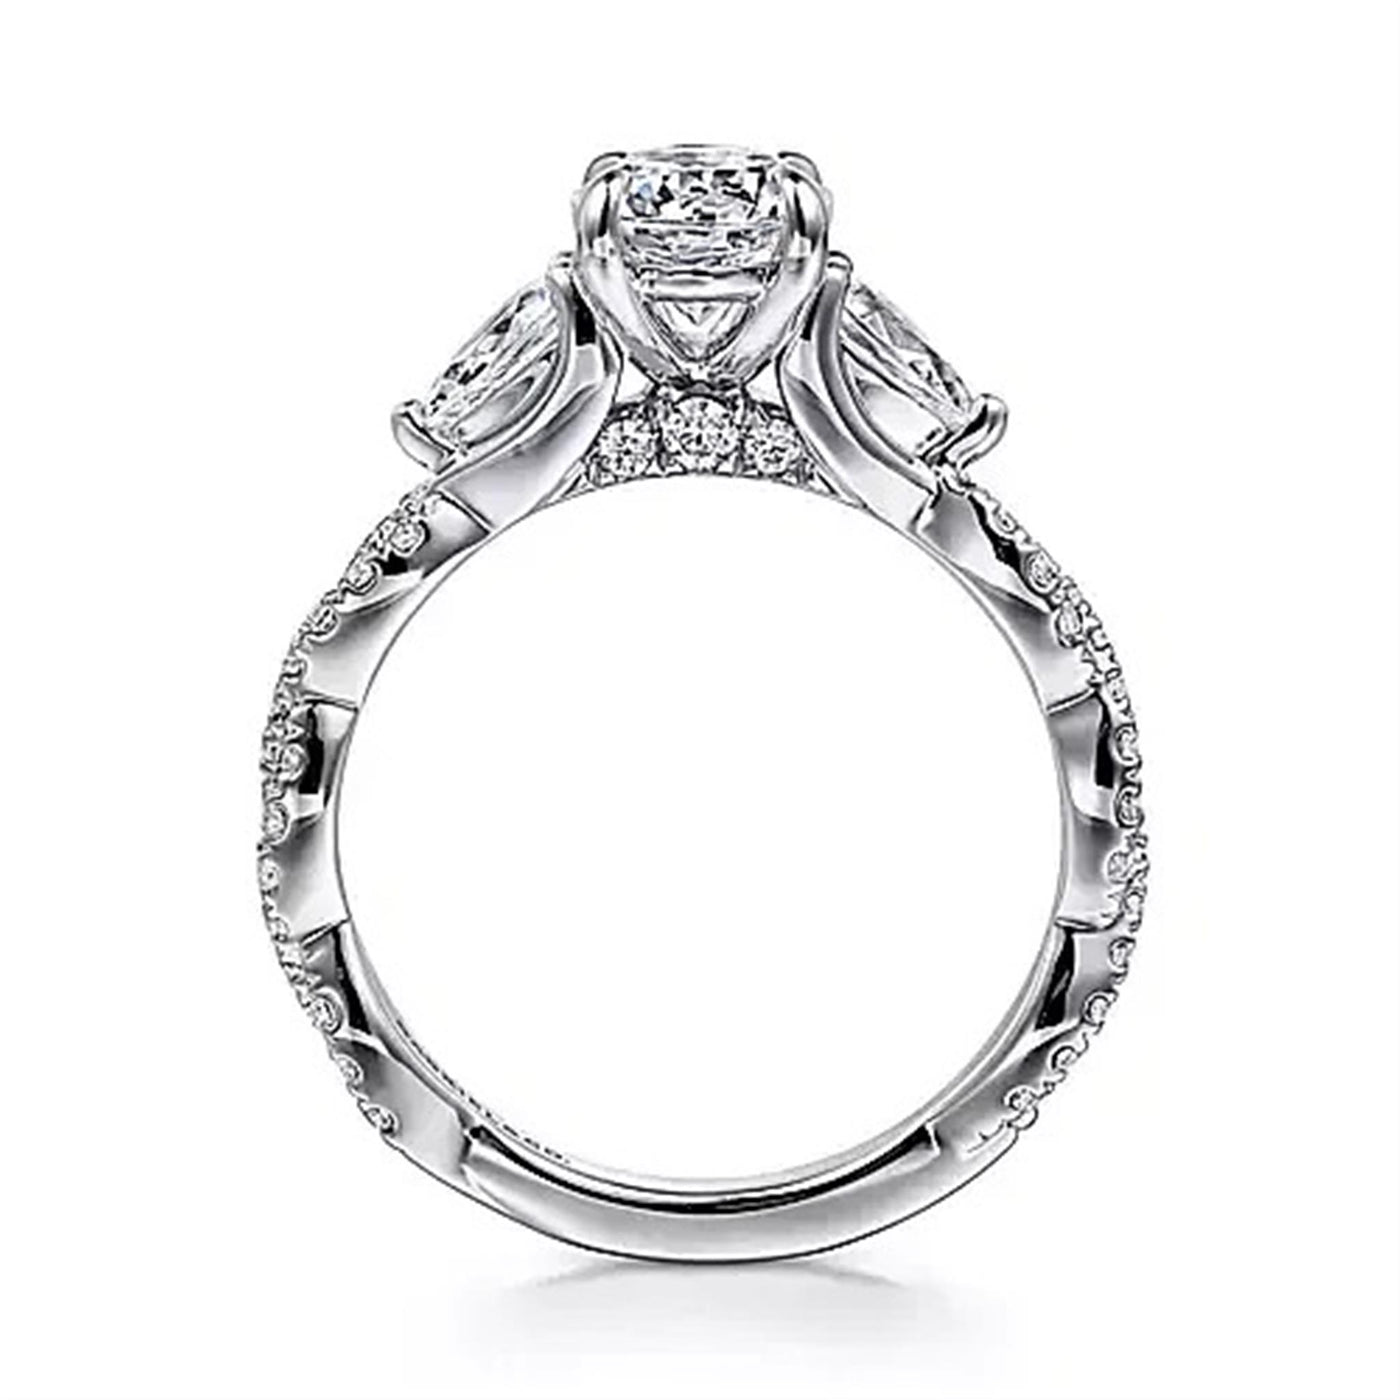 Gabriel - Classic Collection 14K White Gold .78ctw 4 Prong Style Diamond Semi-Mount Engagement Ring